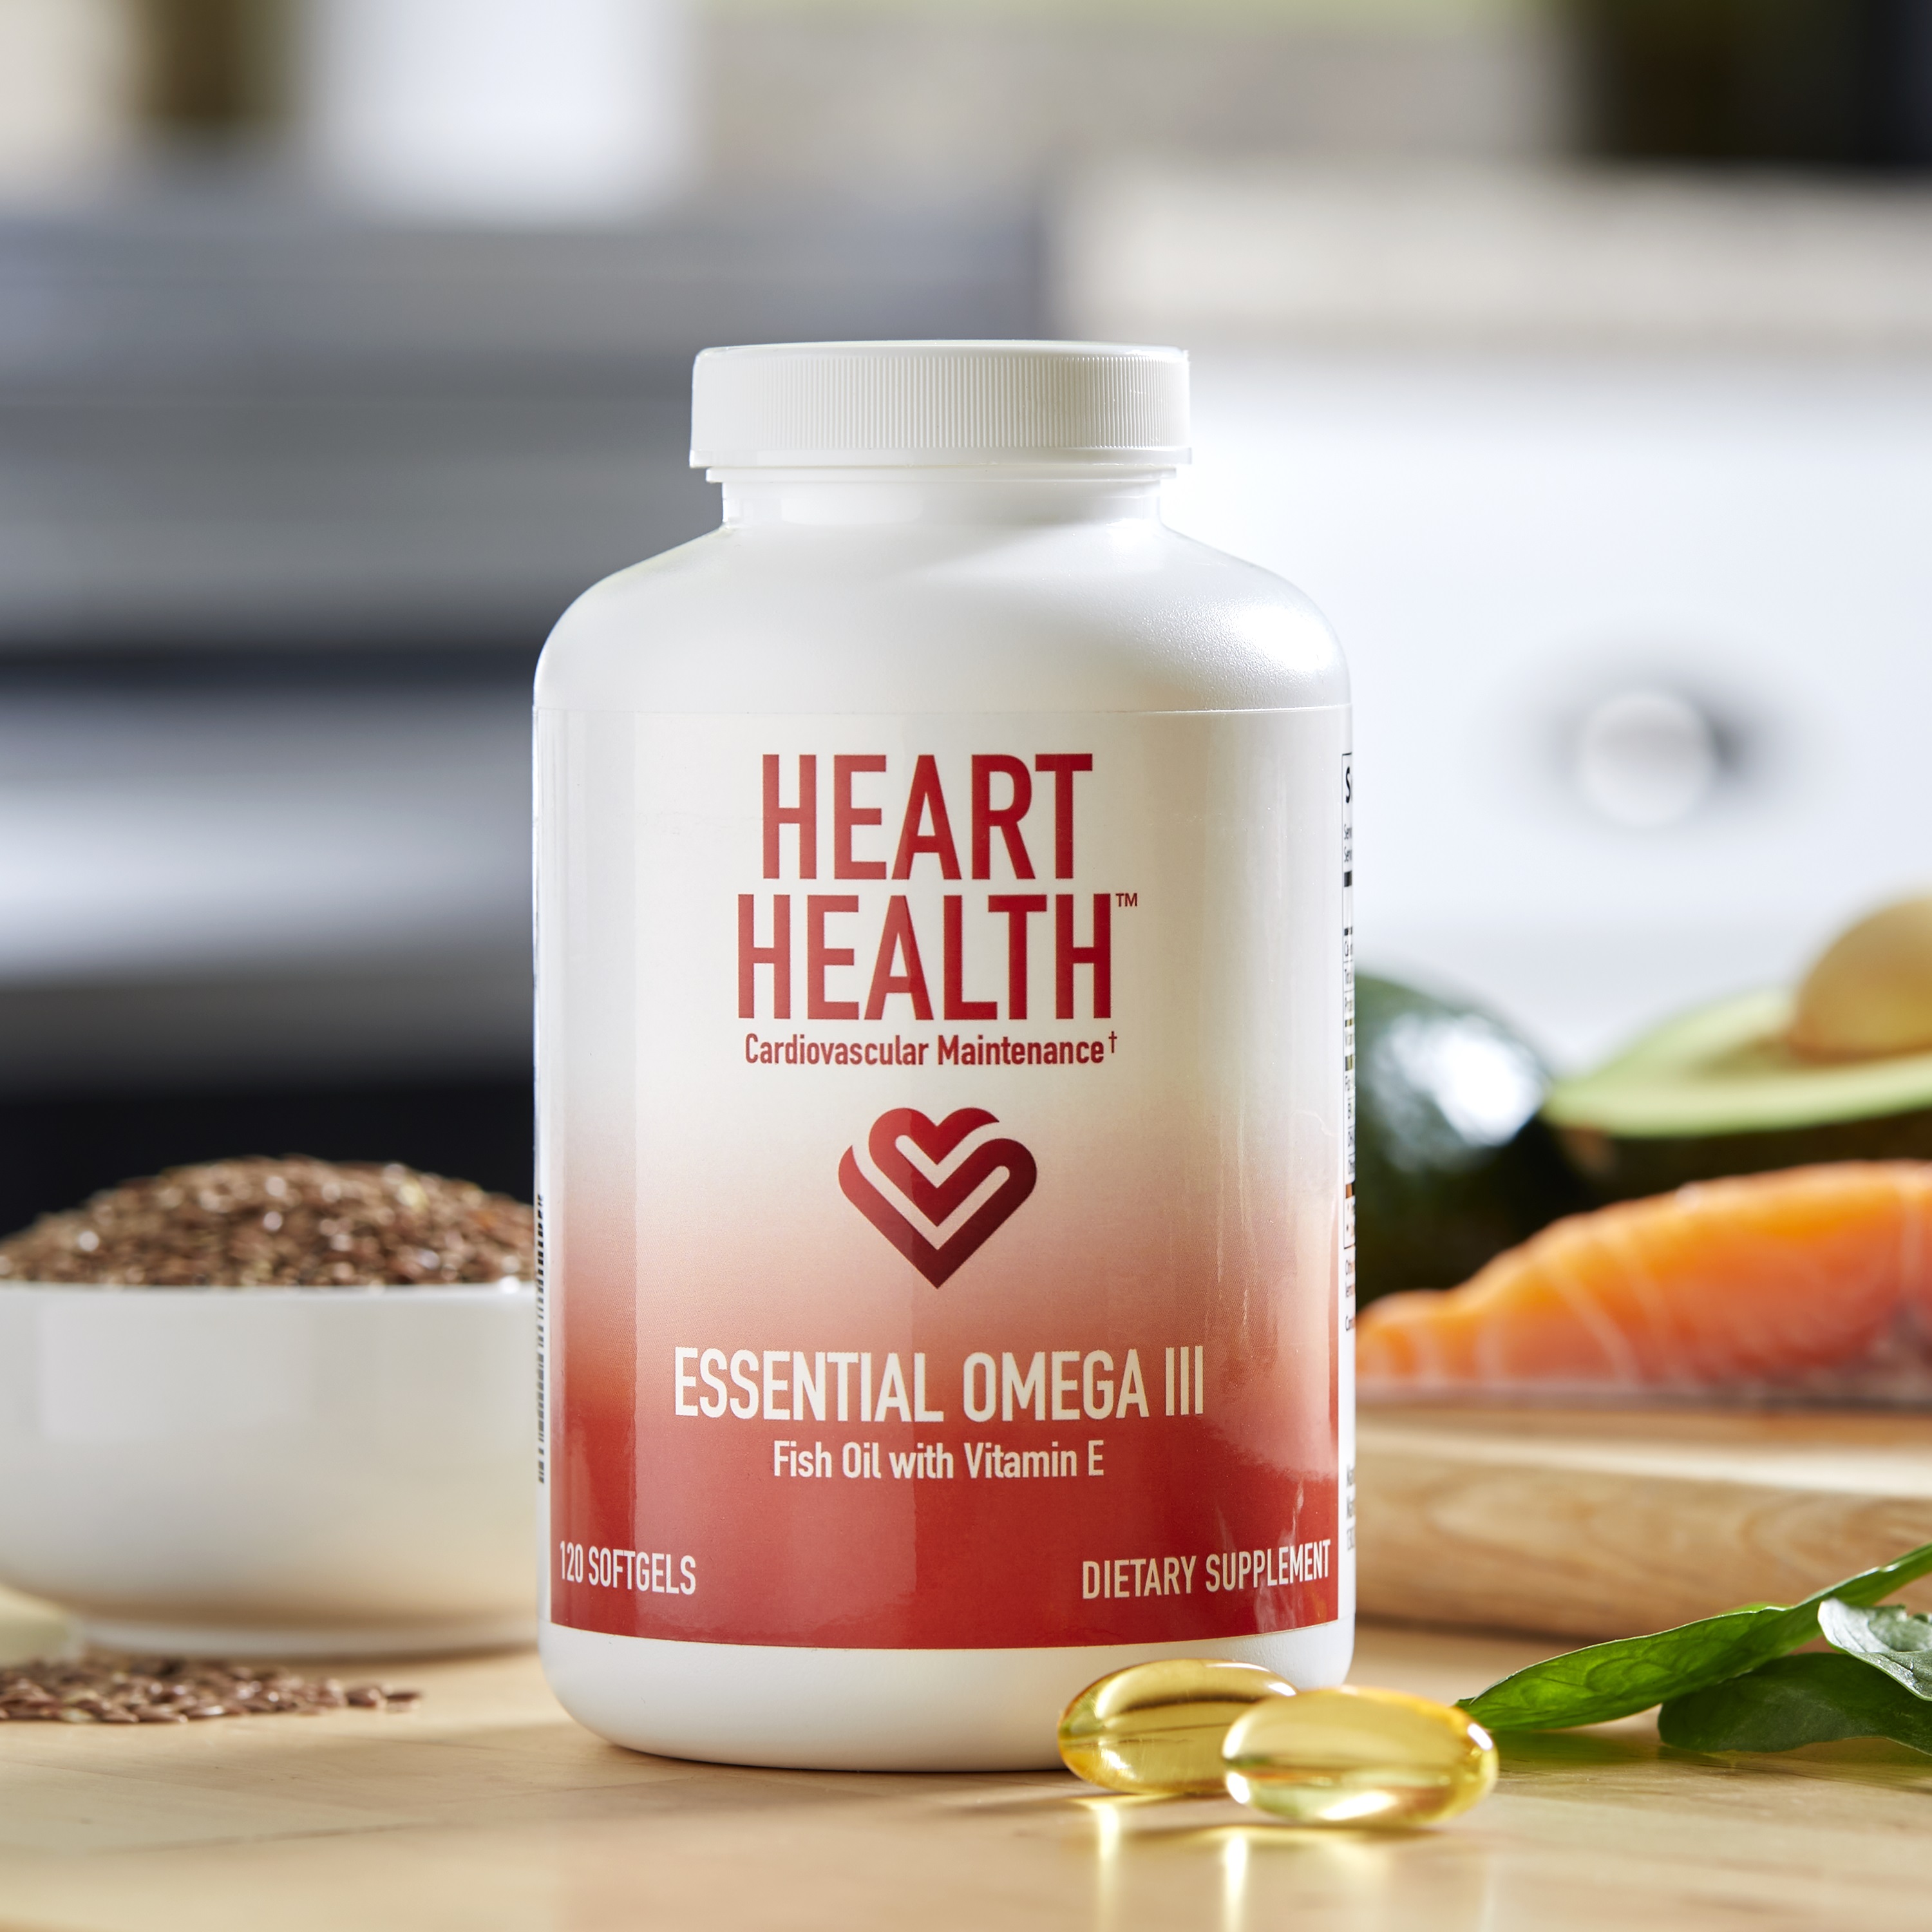 Primary Benefits* of Heart Health Essential Omega III Fish Oil